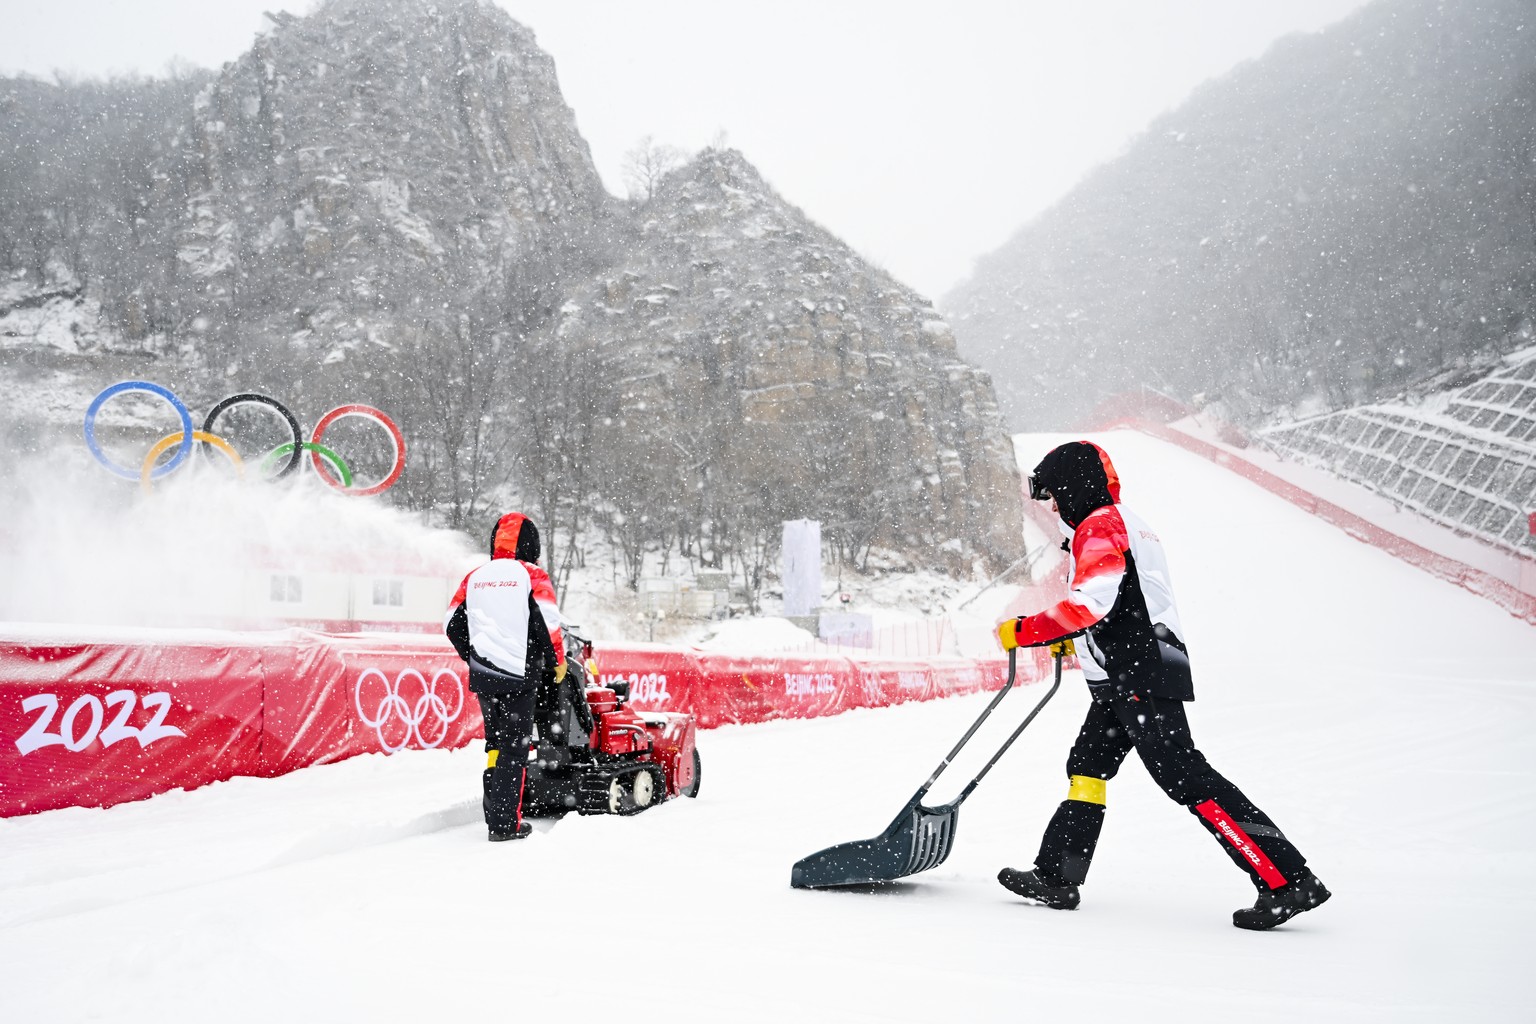 Volunteer removes fresh snow in the finish area of the Alpine Skiing place at the 2022 Olympic Winter Games in Yanqing, China, on Sunday, February 13, 2022. (KEYSTONE/Jean-Christophe Bott)